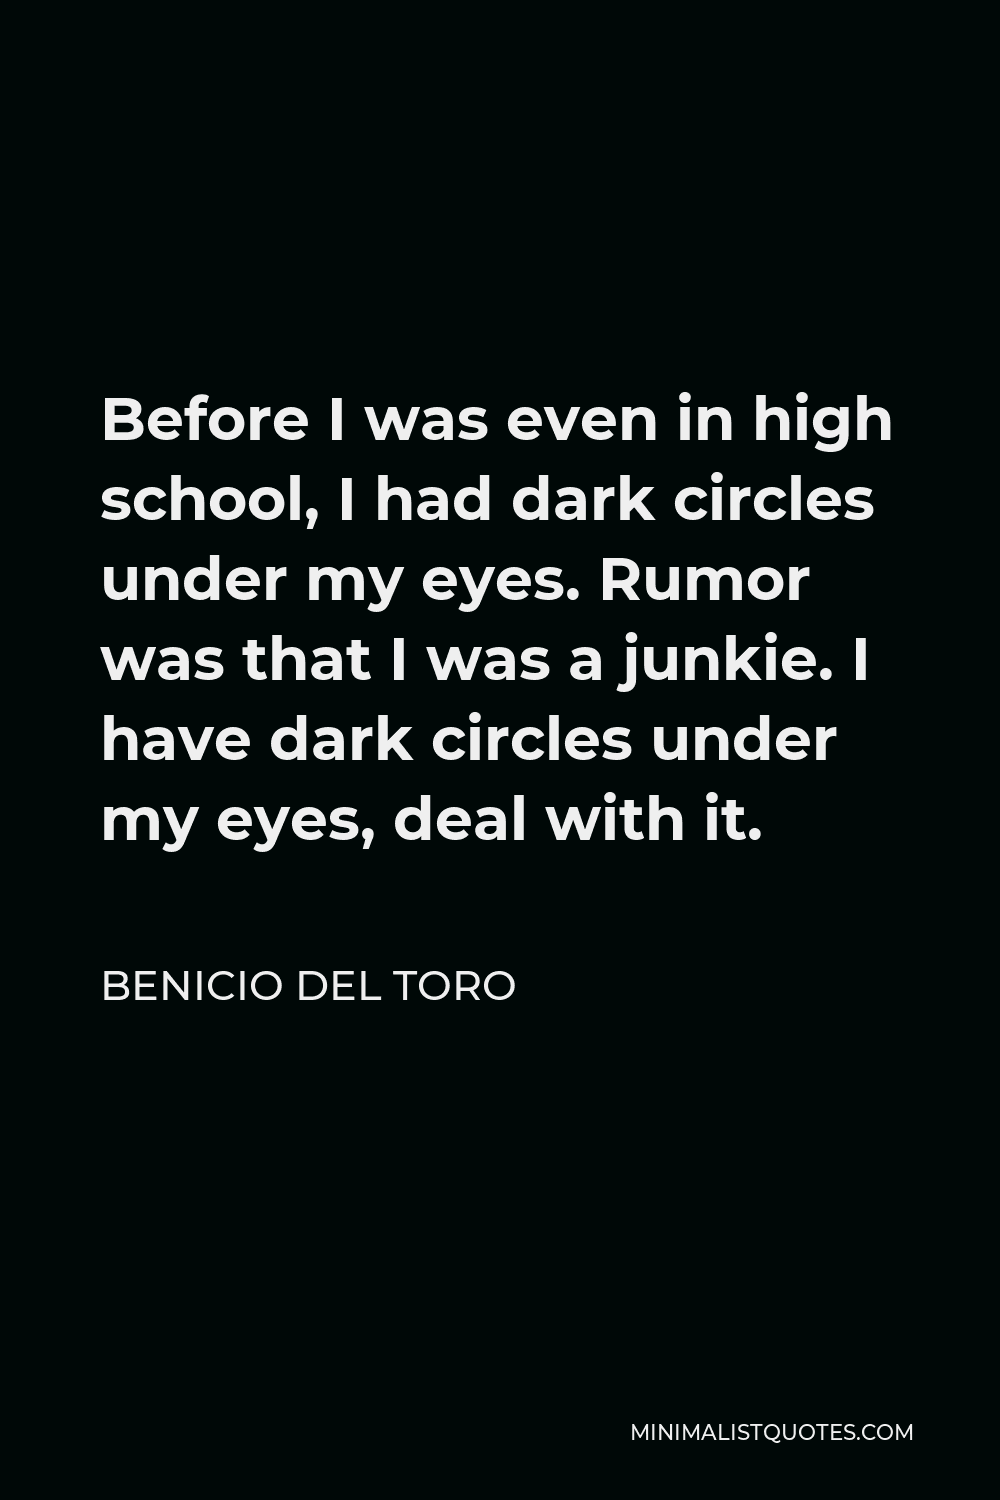 Benicio Del Toro Quote - Before I was even in high school, I had dark circles under my eyes. Rumor was that I was a junkie. I have dark circles under my eyes, deal with it.